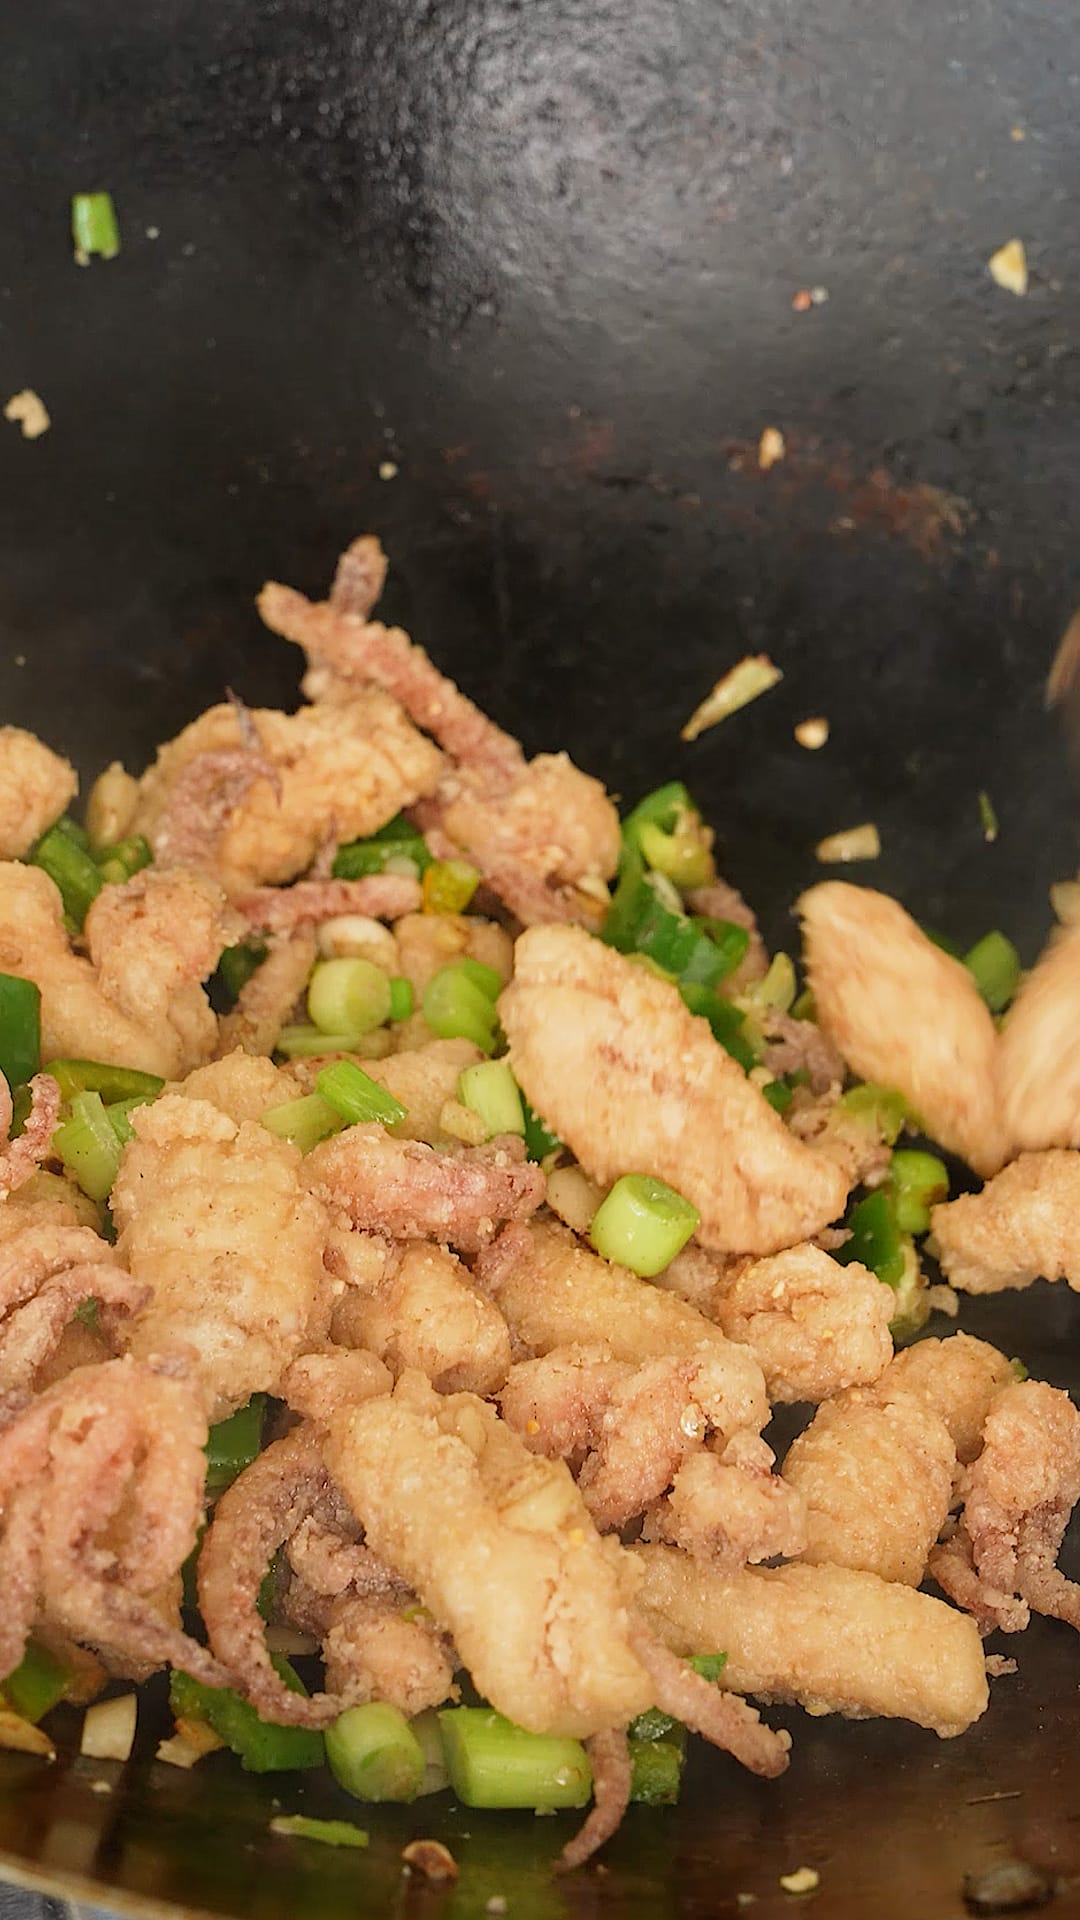 Salt and pepper squid tossed in a wok.